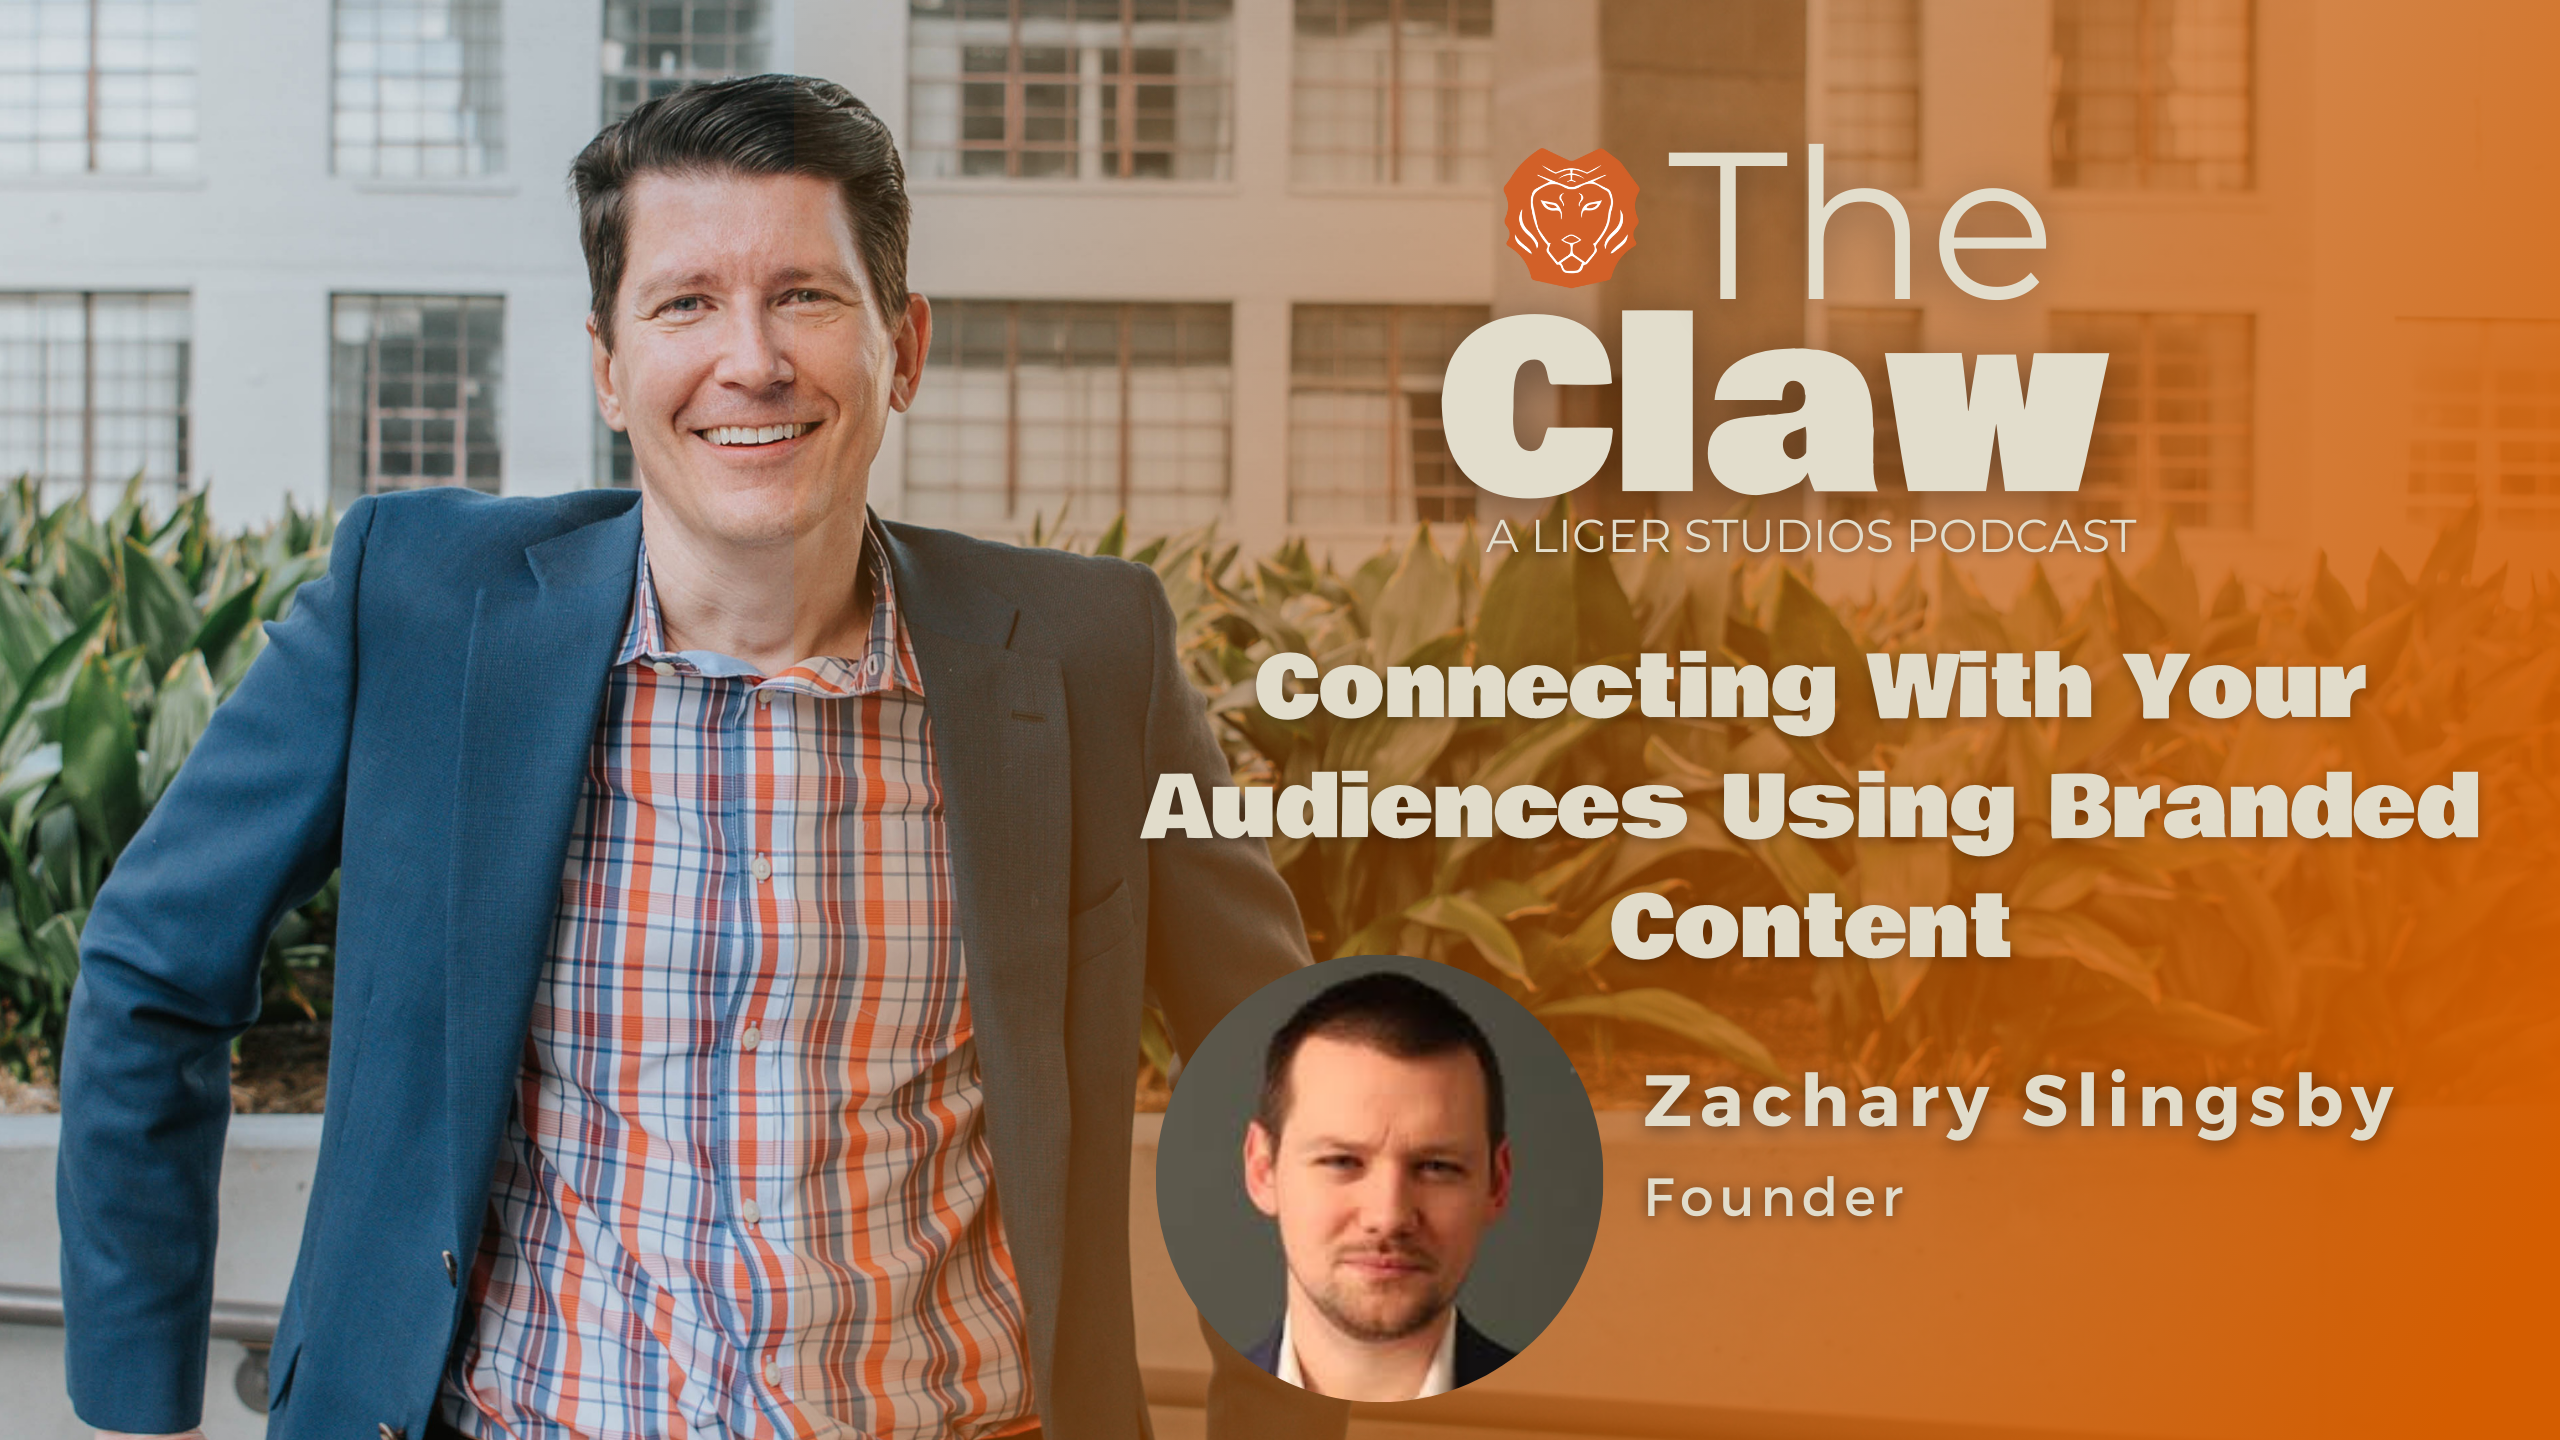 The Claw Podcast: Connecting With Your Audiences Using Branded Content with Zachary Slingsby